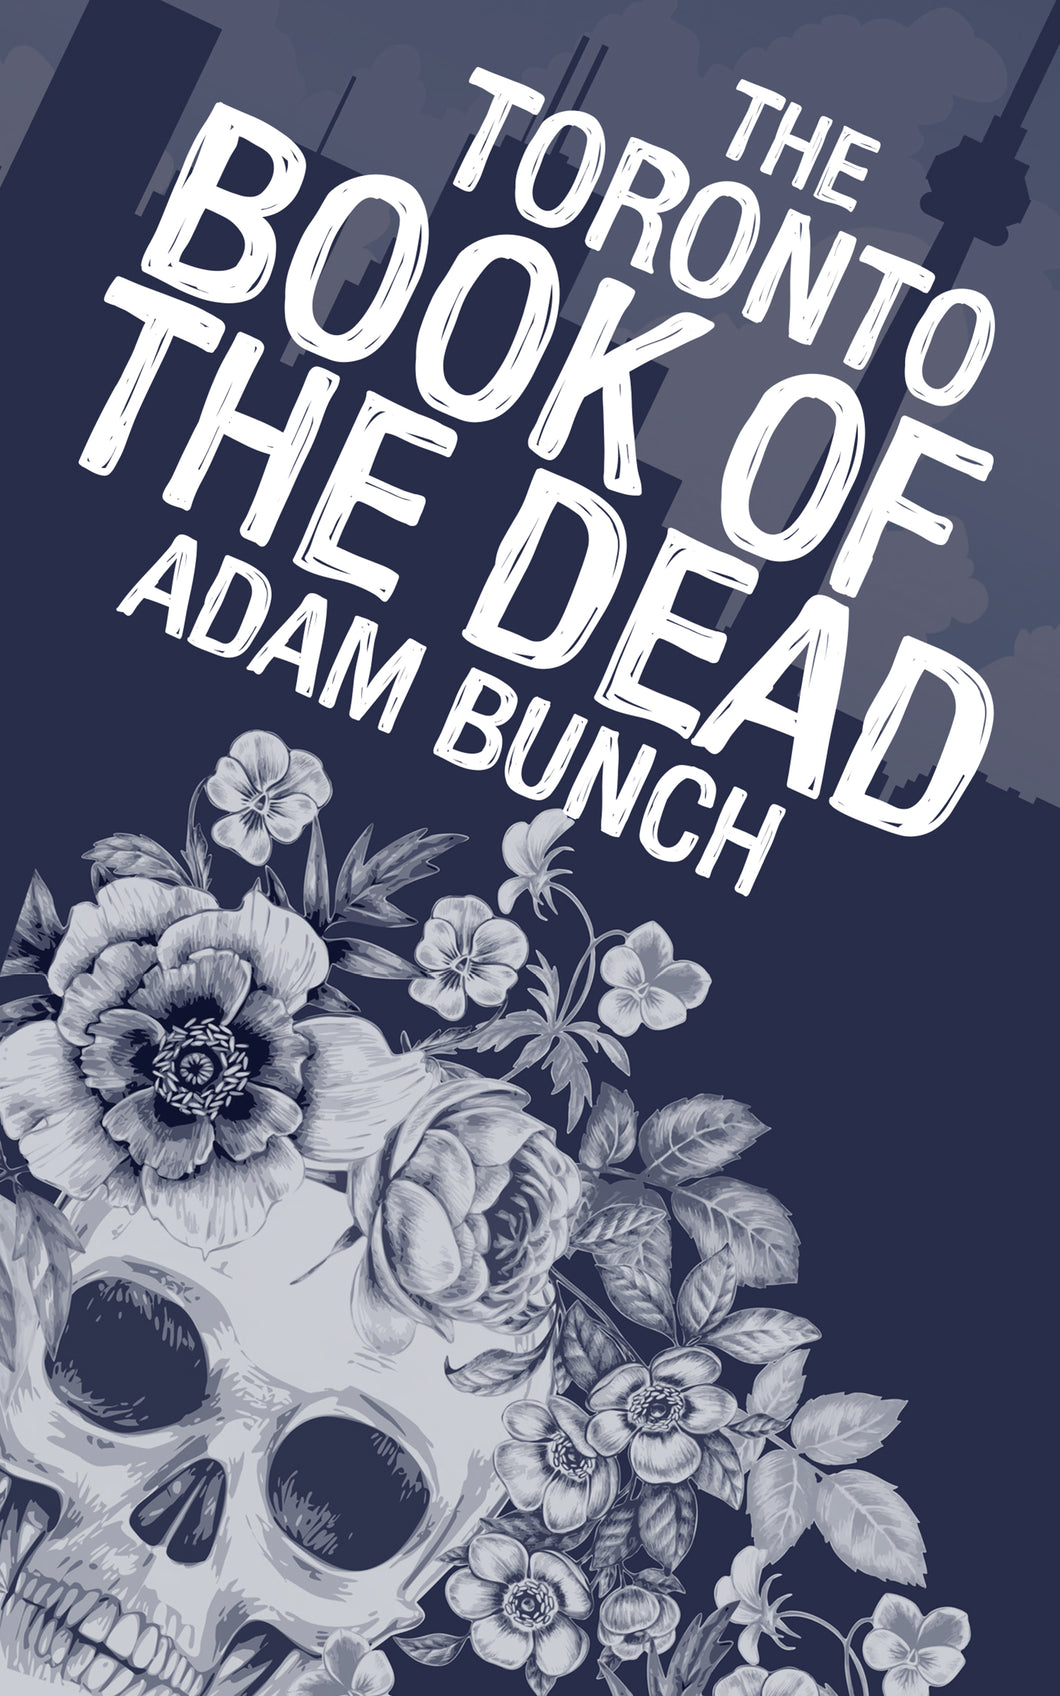 Book: THE TORONTO BOOK OF THE DEAD